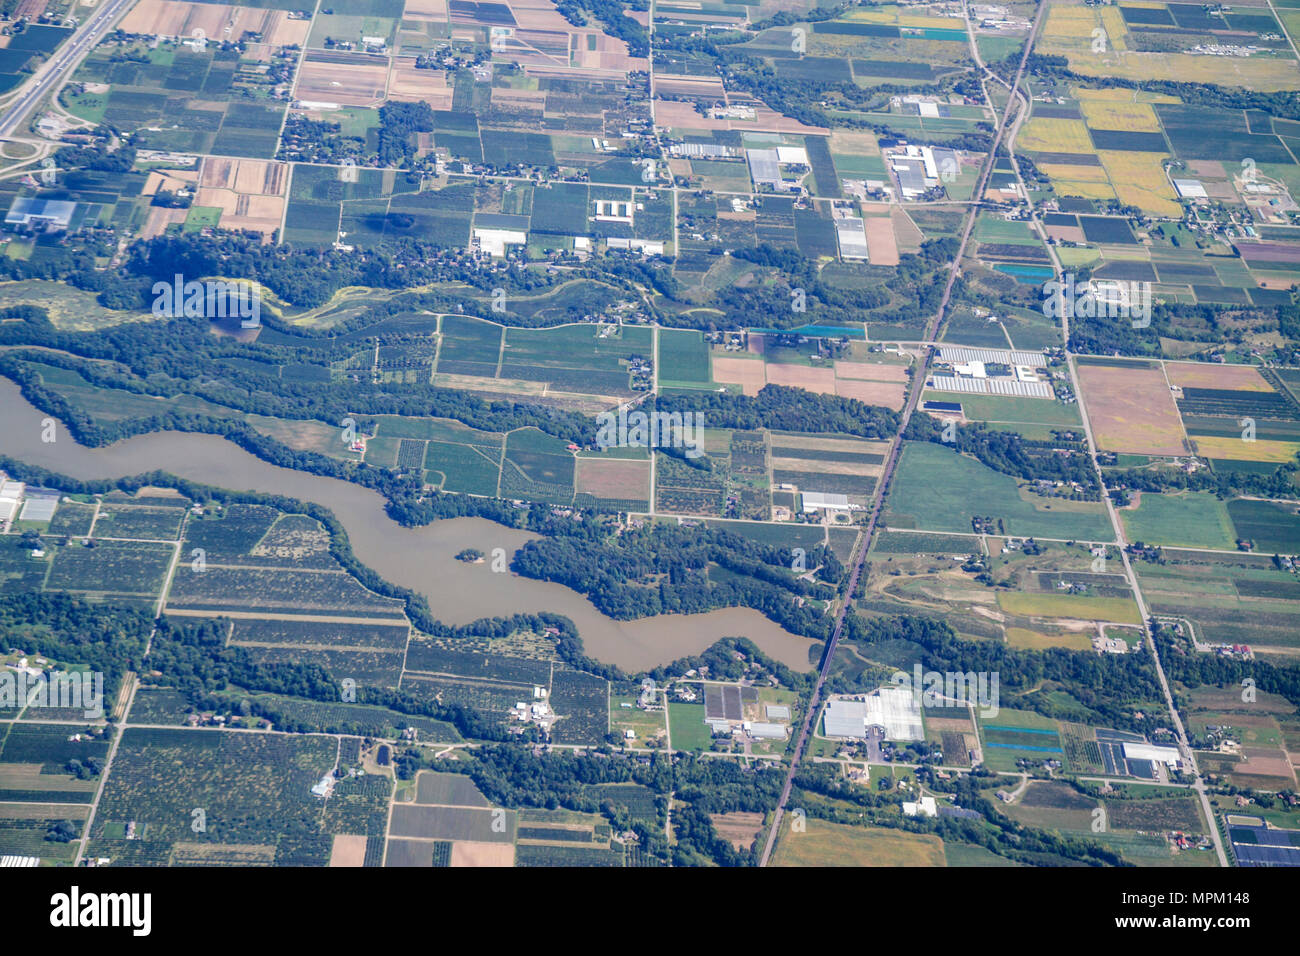 Canada,St. Catharines,approaching Toronto Lester B. Pearson International Airport,YYZ,aerial overhead view from above,farmland,Sixteen Mile Pond,land, Stock Photo